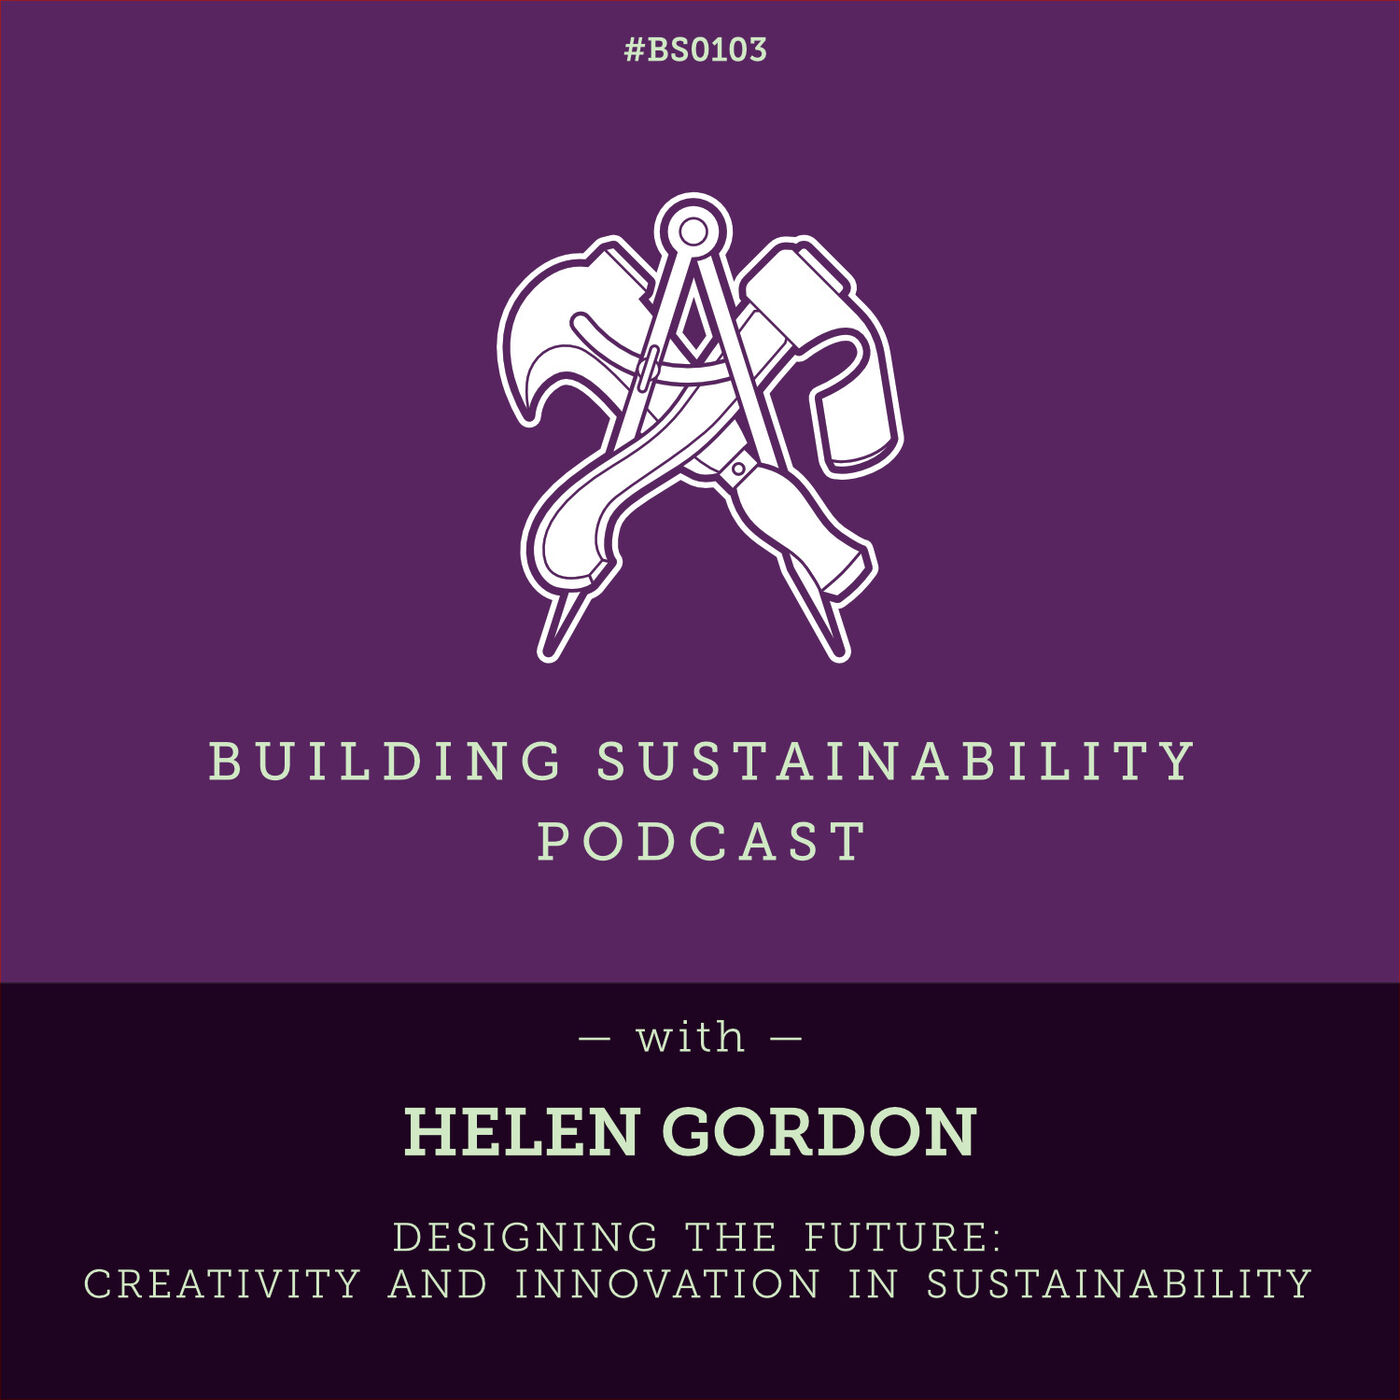 Designing the Future: Creativity and Innovation in Sustainability - Helen Gordon - BS103